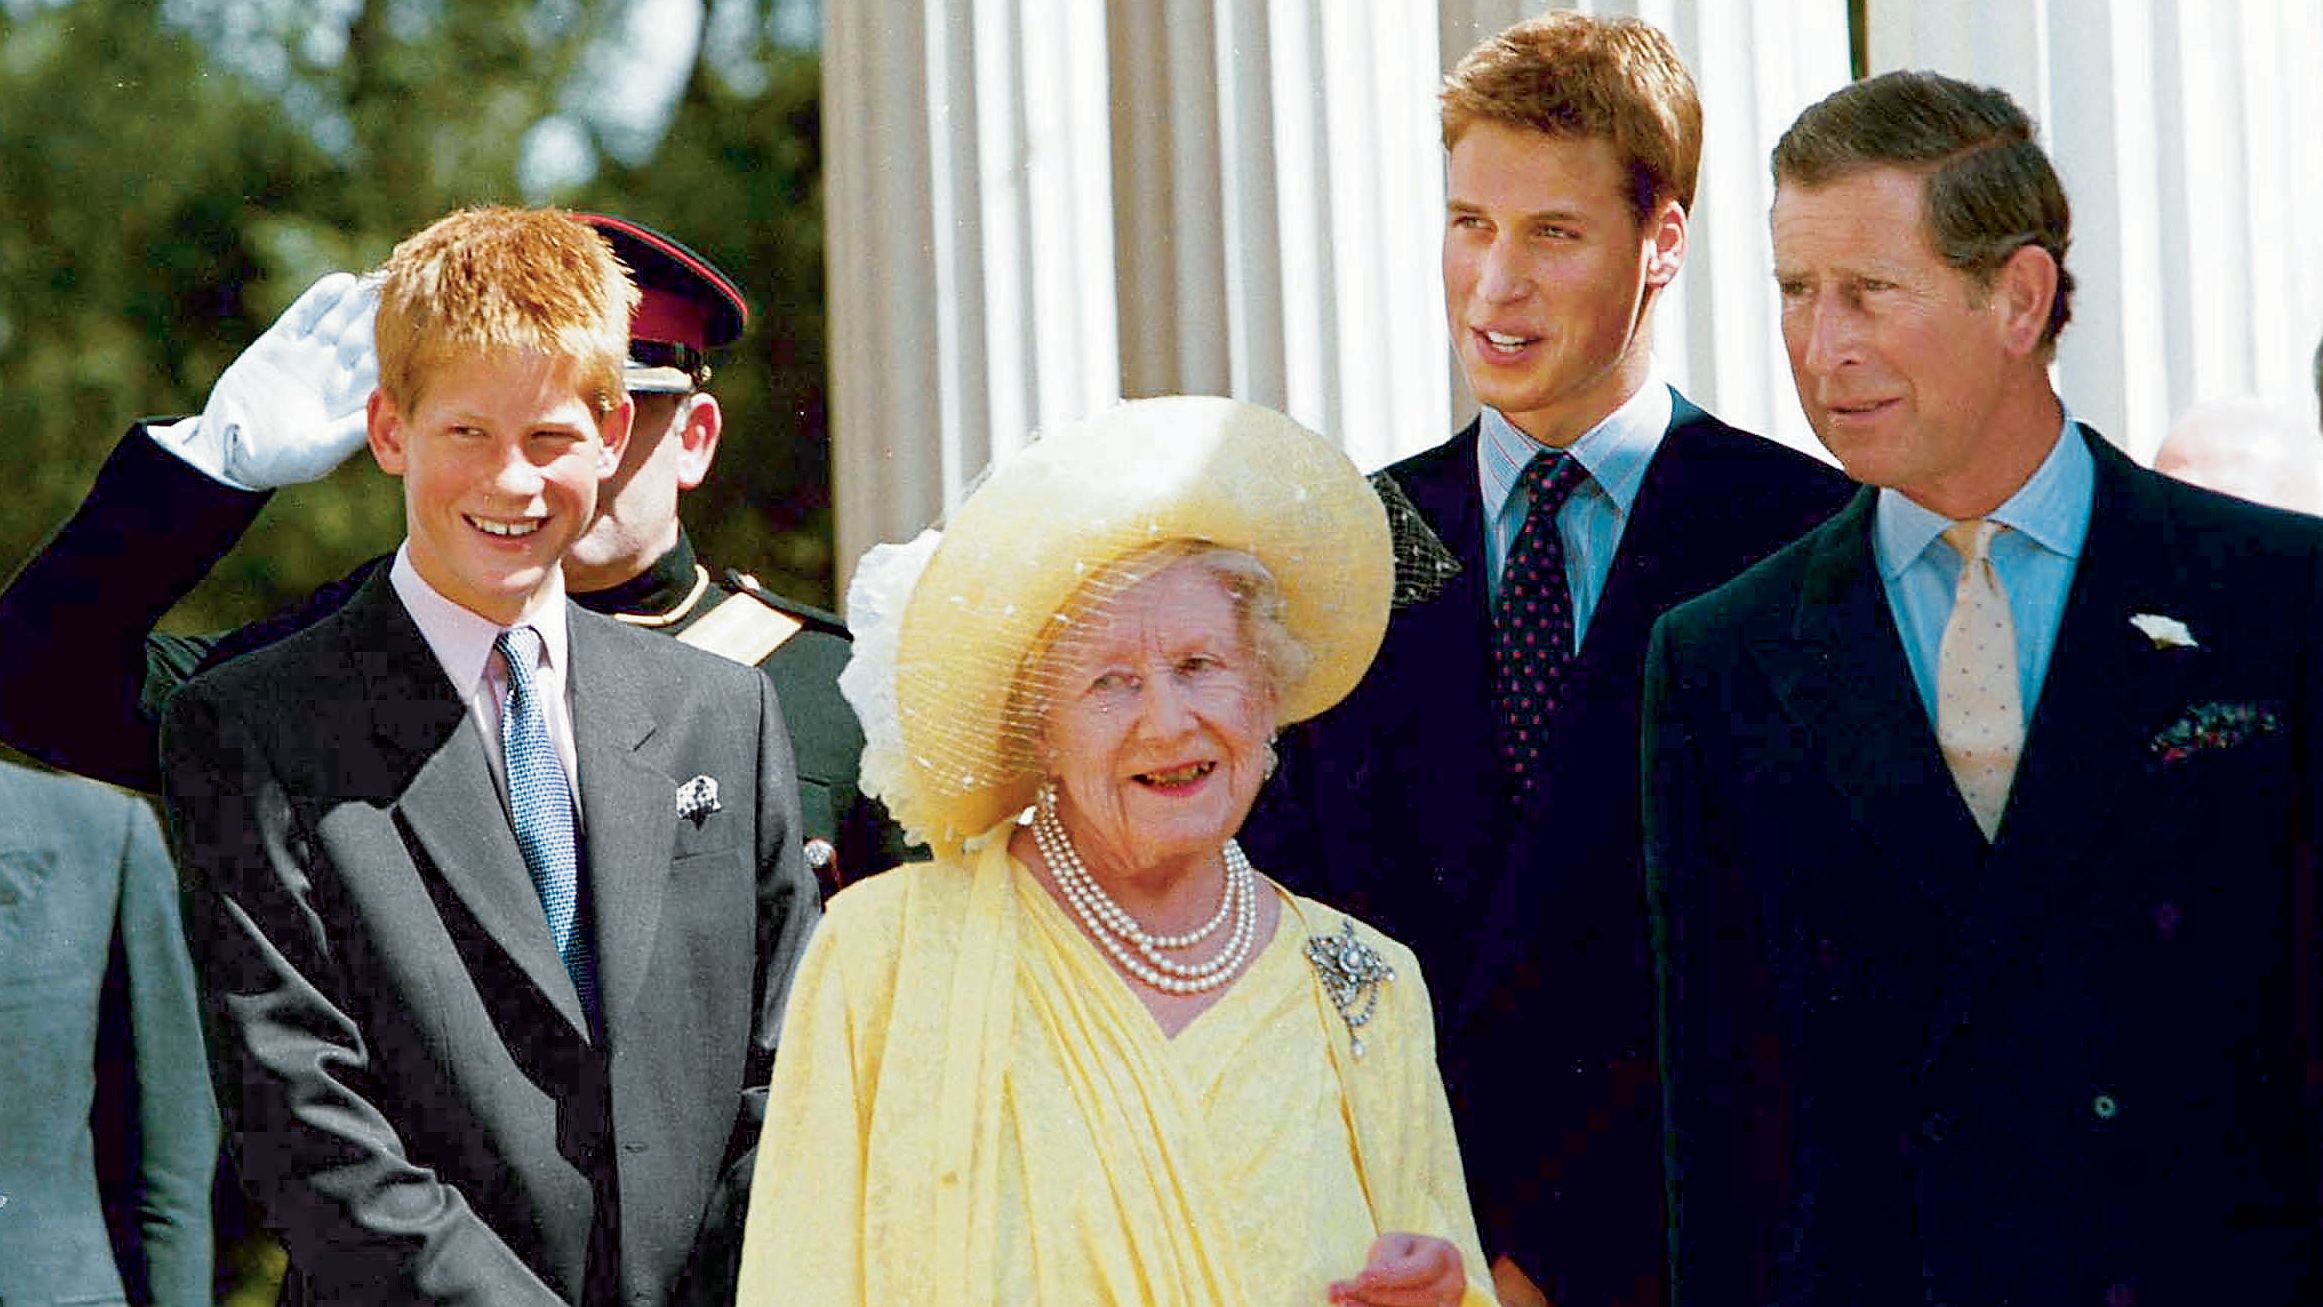 Britain's Queen Mother joins Prince Charles and his sons during an occasion marking her 99th birthday in 1999.